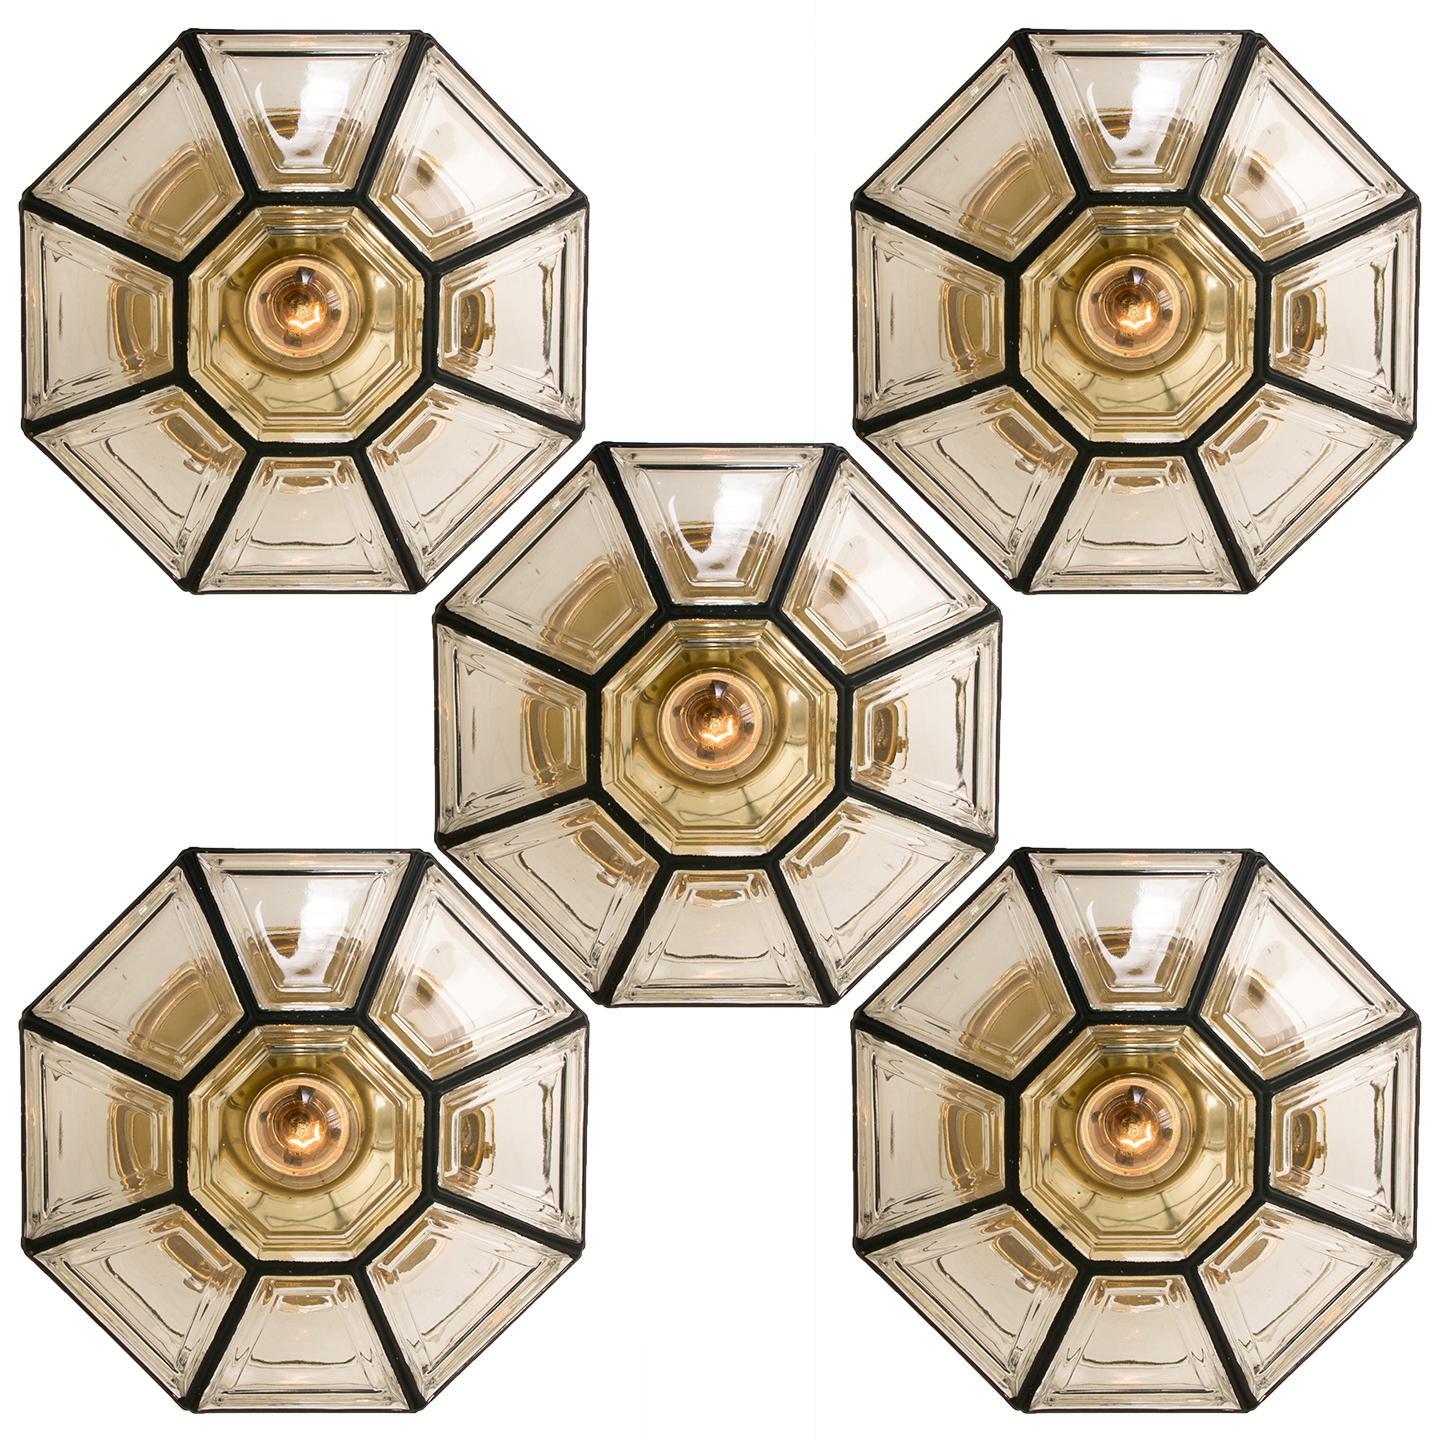 This beautiful and unique octagonal set of glass light flushmounts or wall lights were manufactured by Glashütte Limburg in Germany during the 1960s, (late 1960s or early 1970s). Nice craftsmanship. Elaborate clear bubble glass which bulges slightly